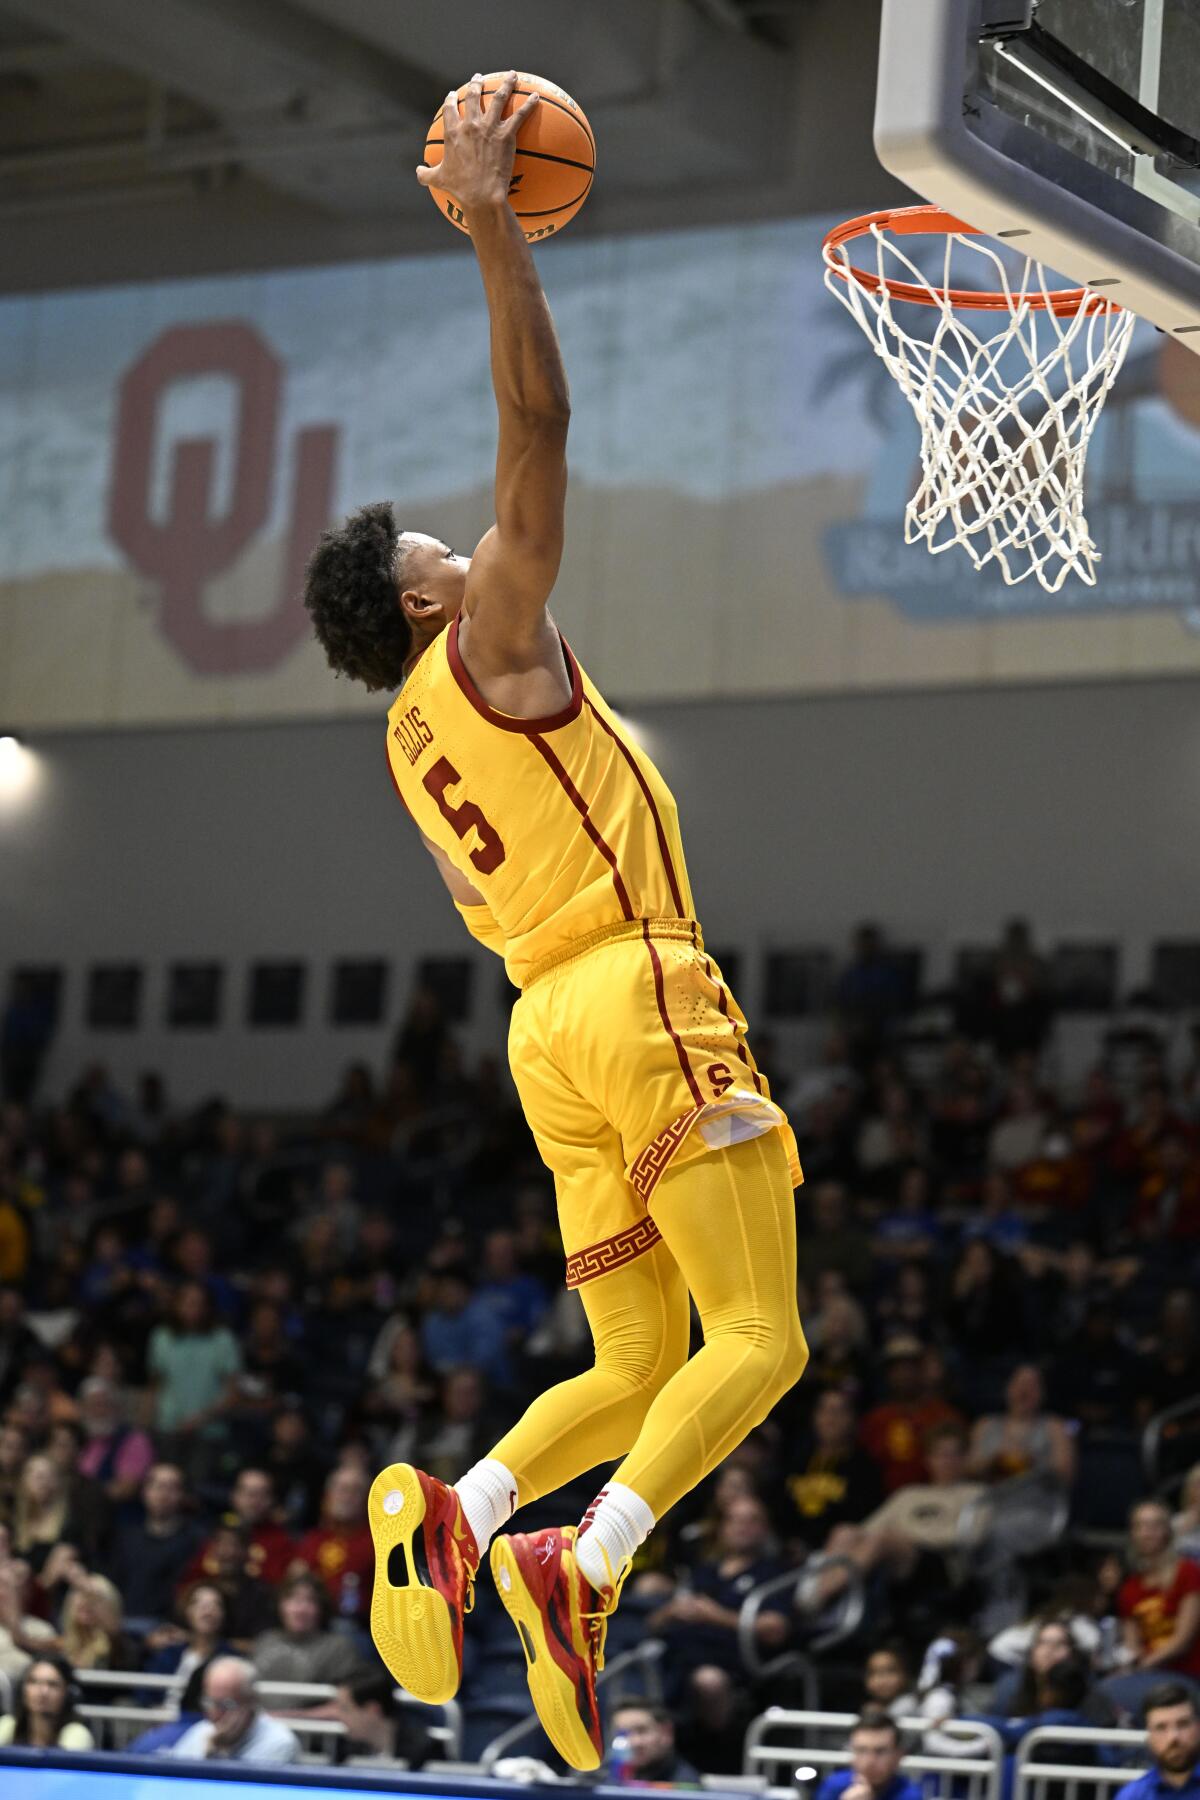 USC guard Boogie Ellis elevates for a right-handed dunk against Seton Hall.